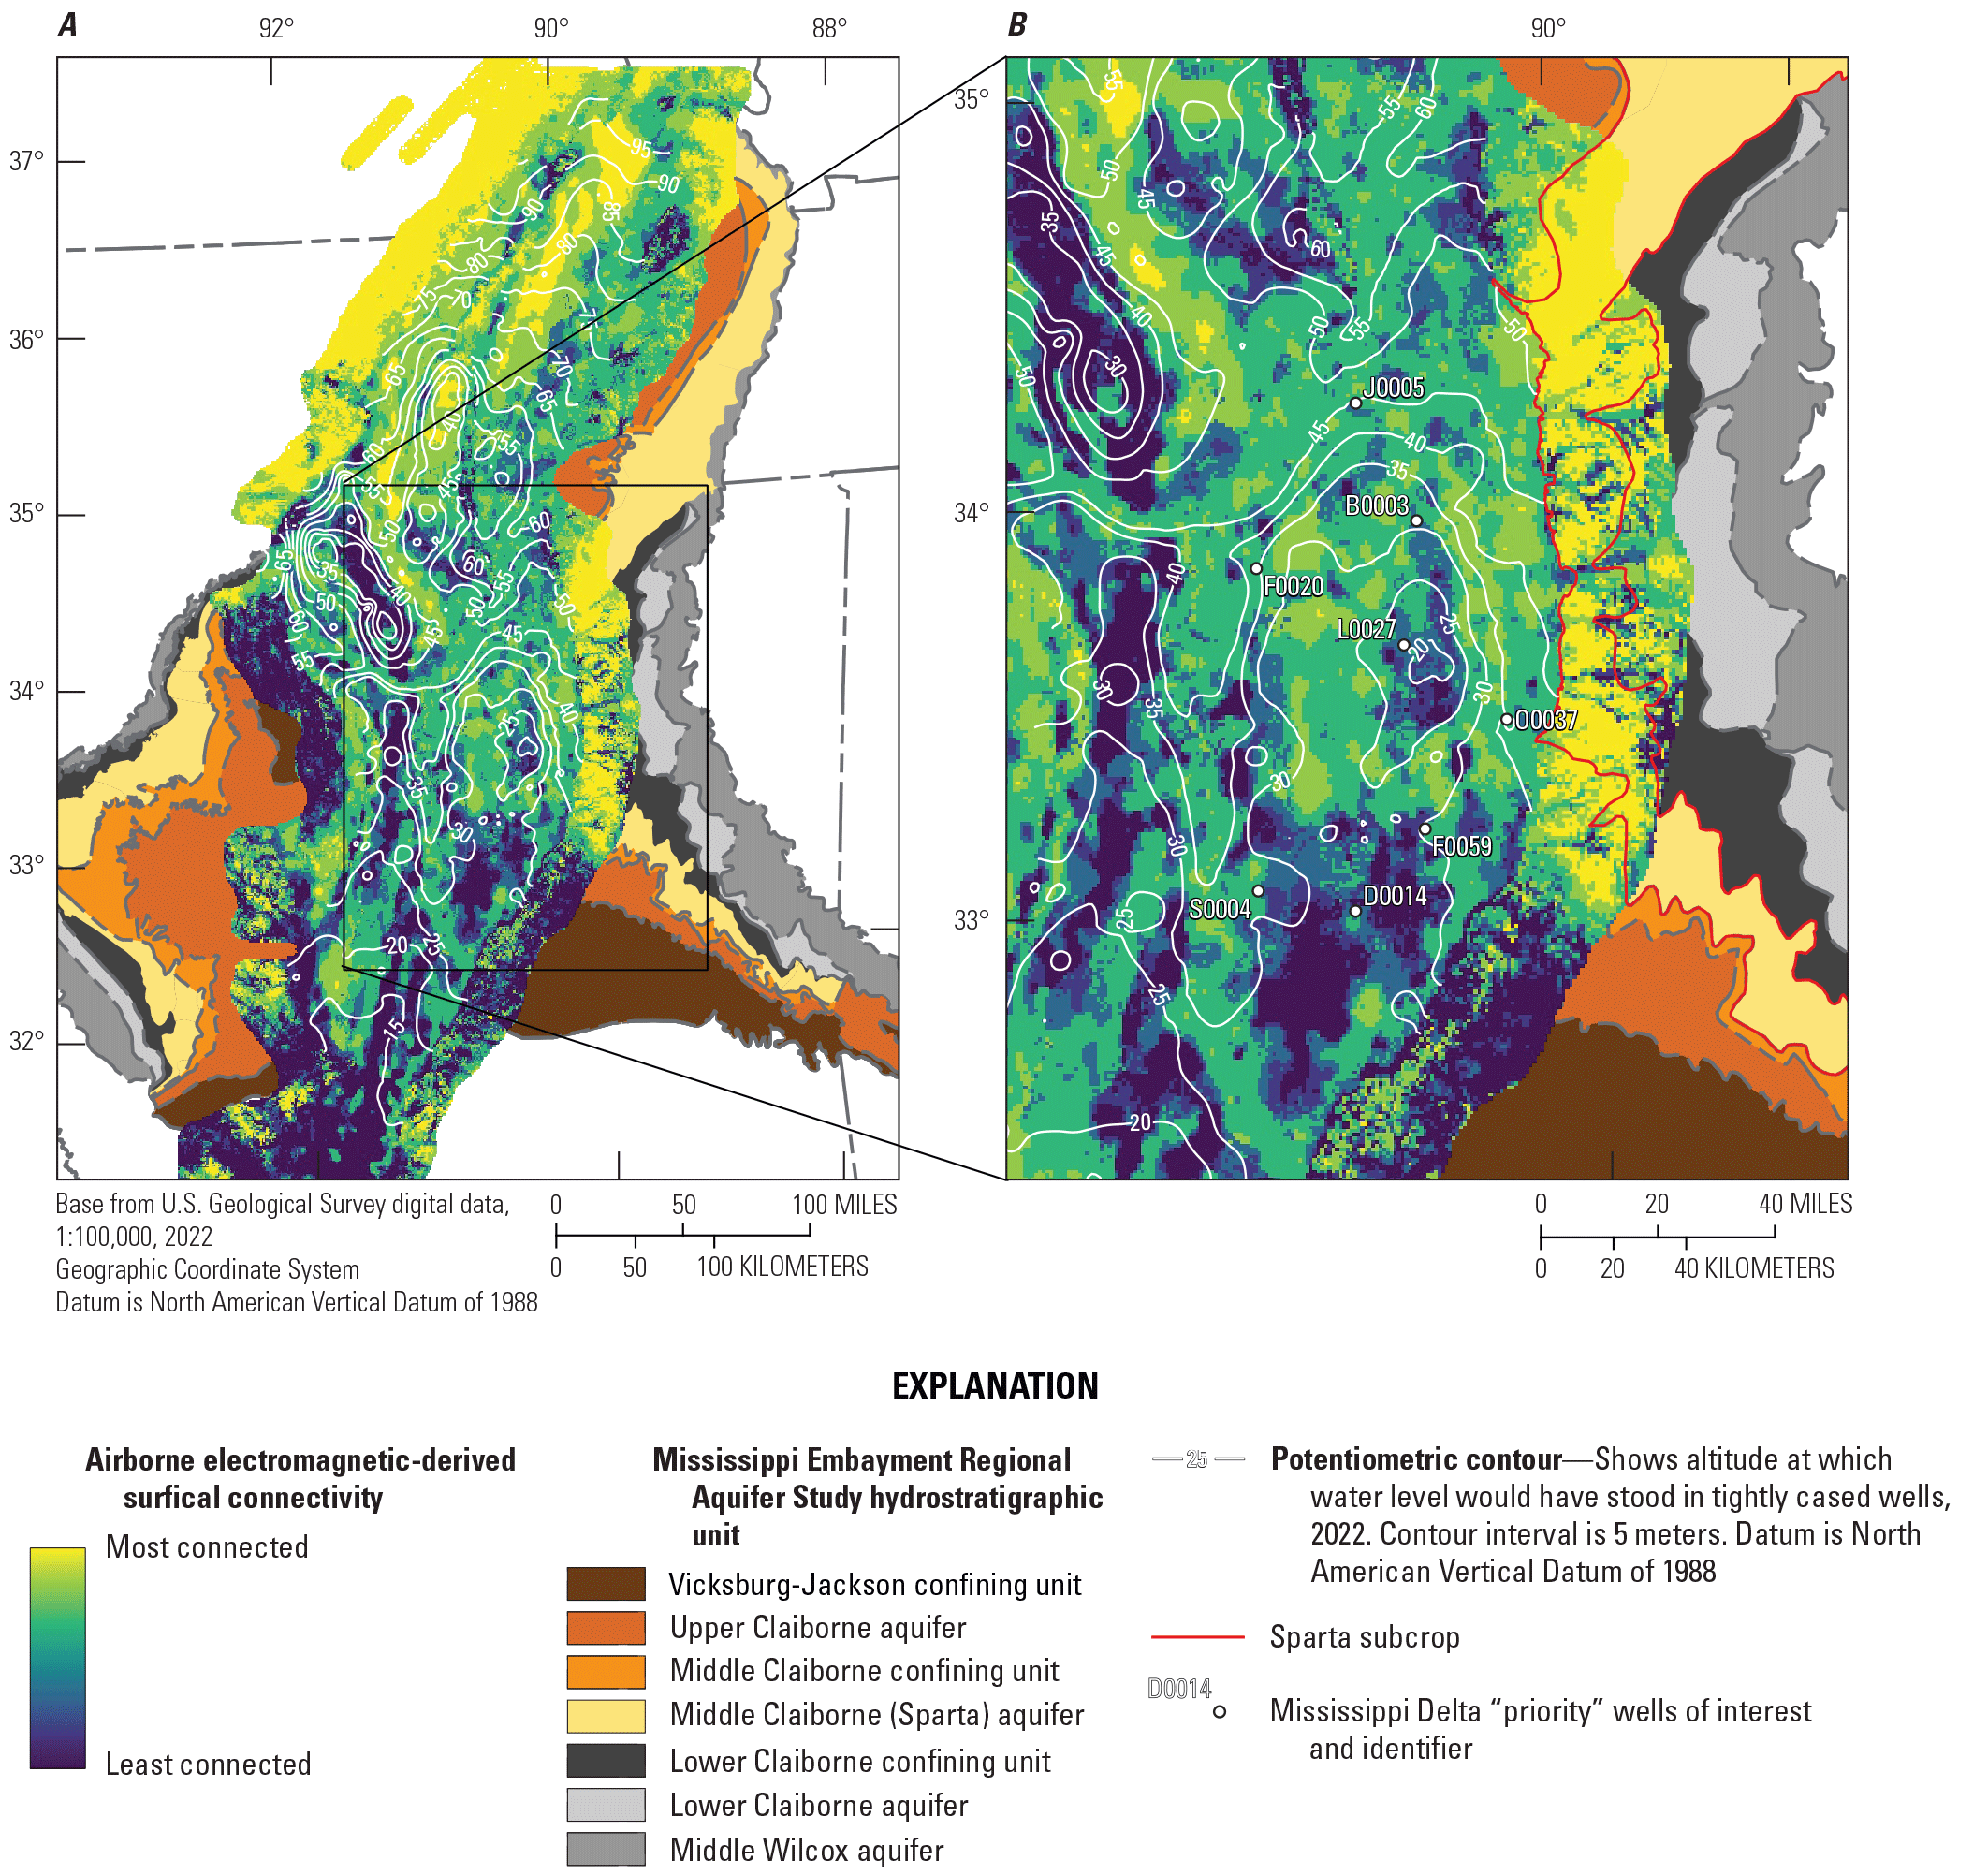 Areas of increased drawdown often coincide with areas interpreted to have surficial
                     connectivity.